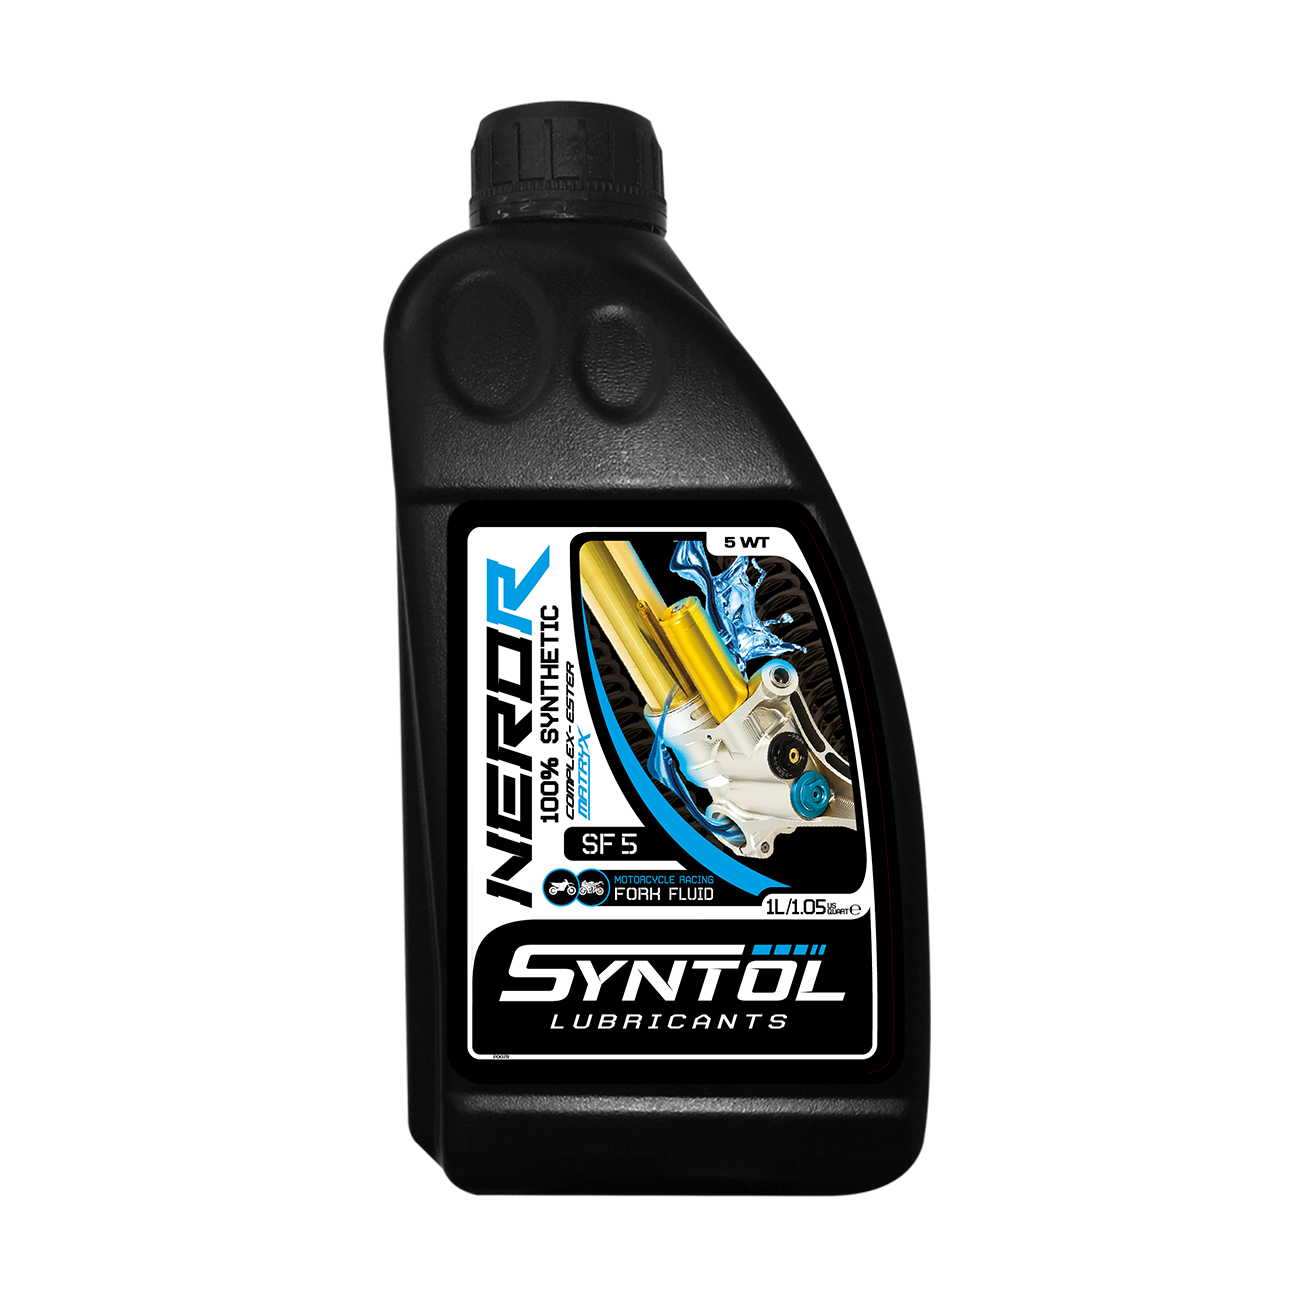 Syntol Nero-R SF 5 Racing Motorcycle Fork Fluid - 1 Litre-F0064-1-Oils and Lubricants-Pyramid Motorcycle Accessories